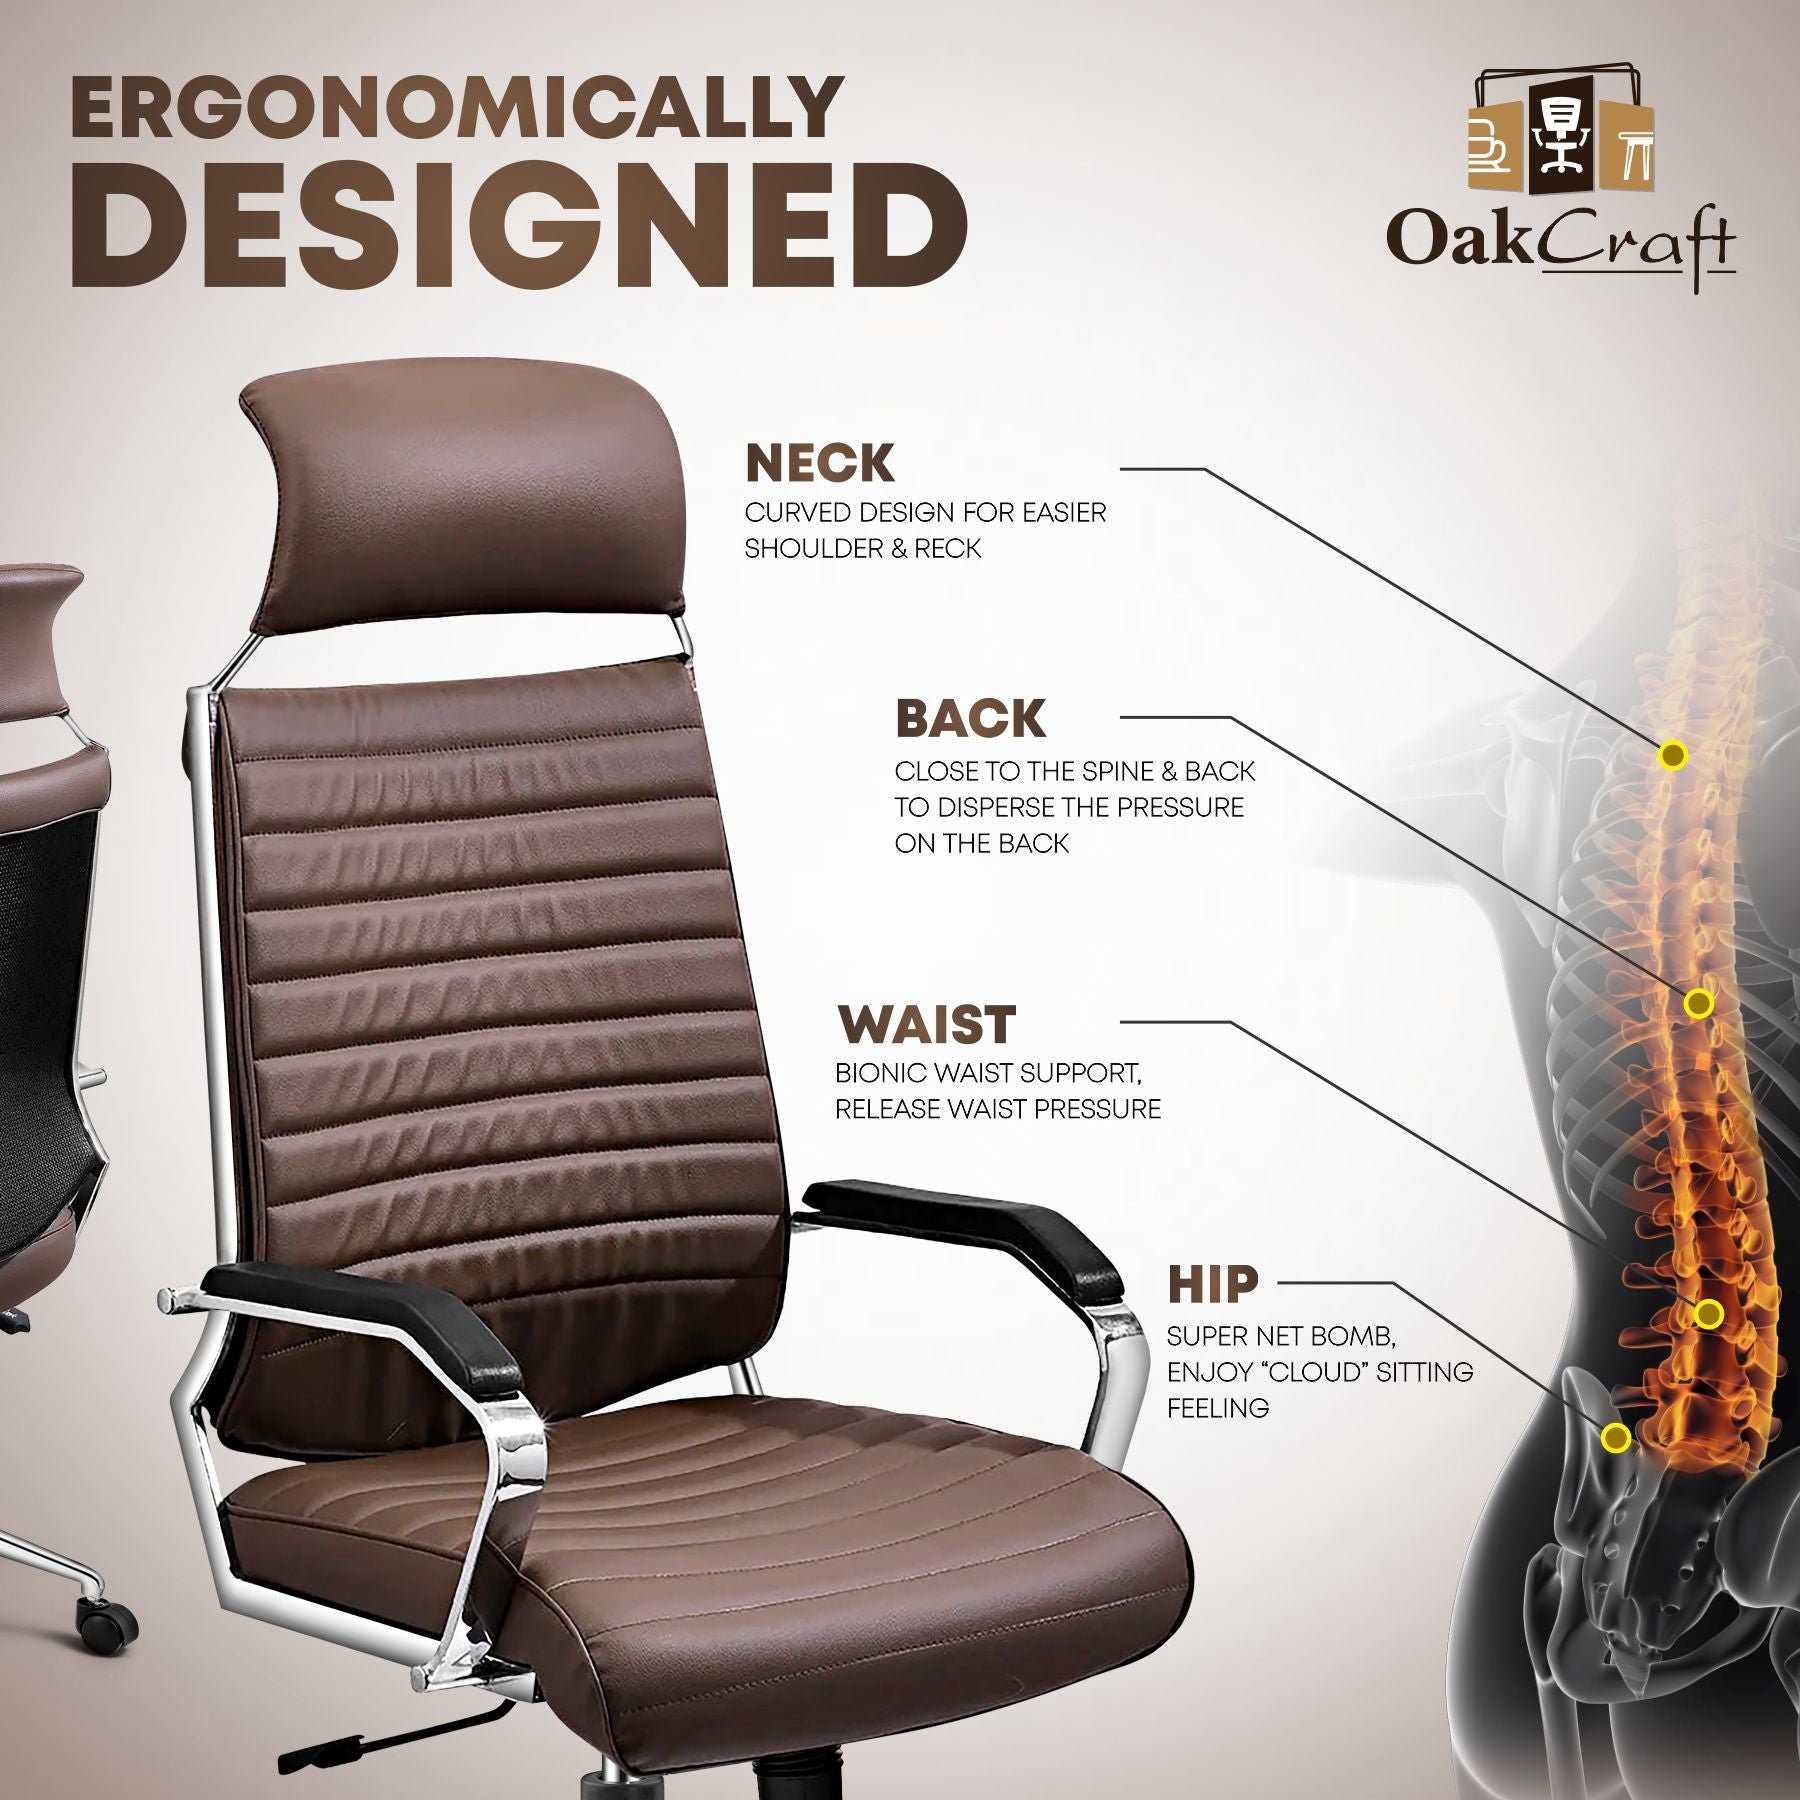 Oakcraft Acier- Made with French Artistry, Unrivaled Ergonomics in the Prime Metal Sleek Leatherette Office Executive Chair - Oakcraft